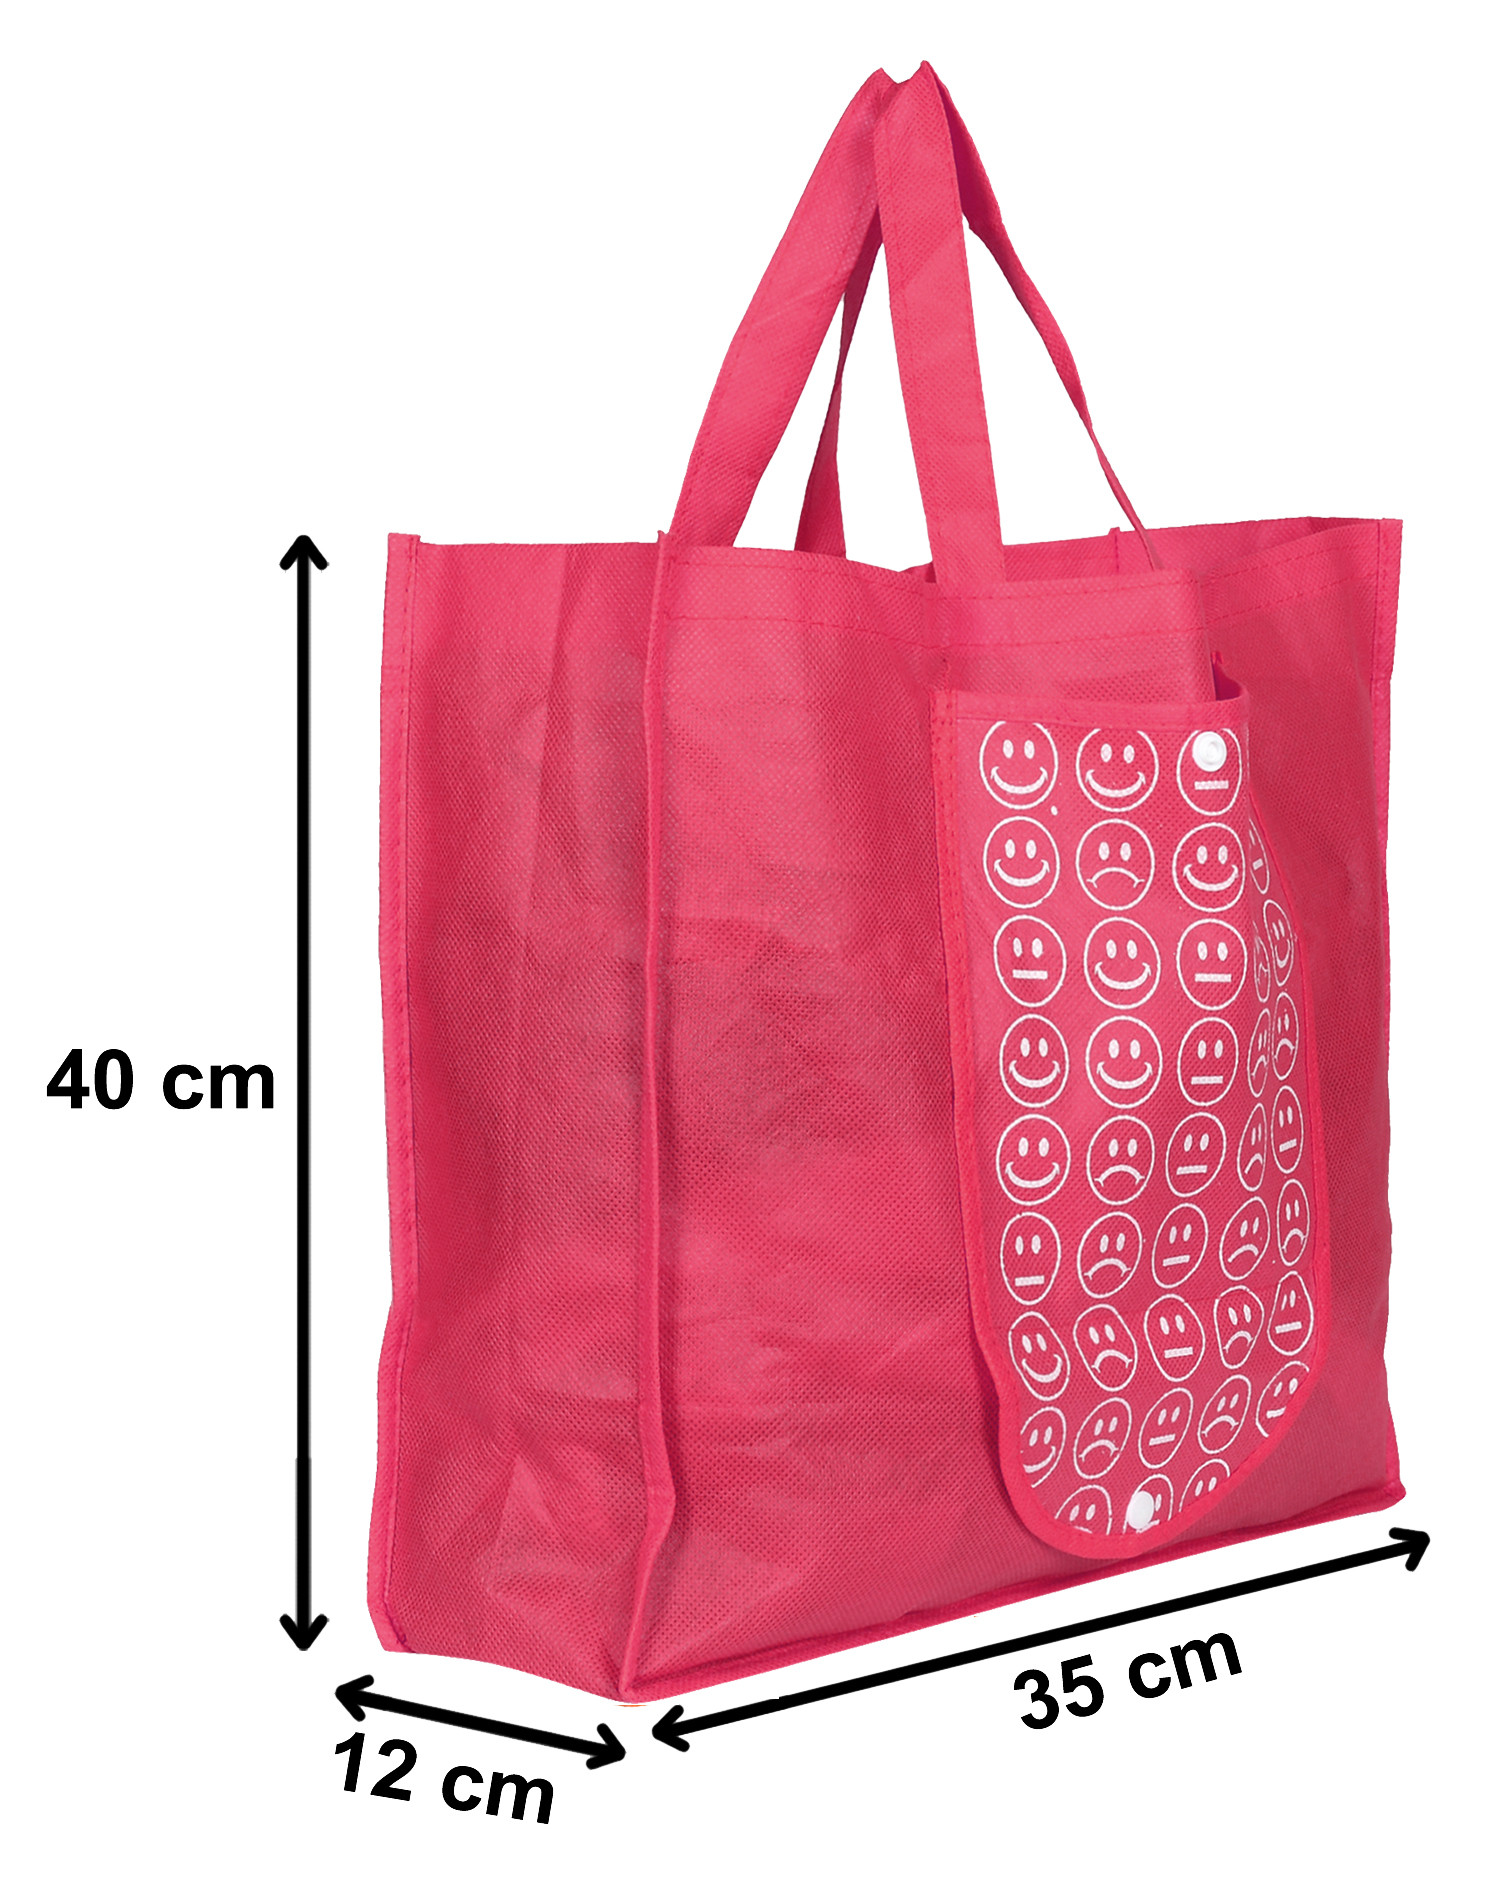 Kuber Industries Shopping Grocery Bags Foldable, Washable Grocery Tote Bag with One Small Pocket, Eco-Friendly Purse Bag Fits in Pocket Waterproof & Lightweight (Pink)